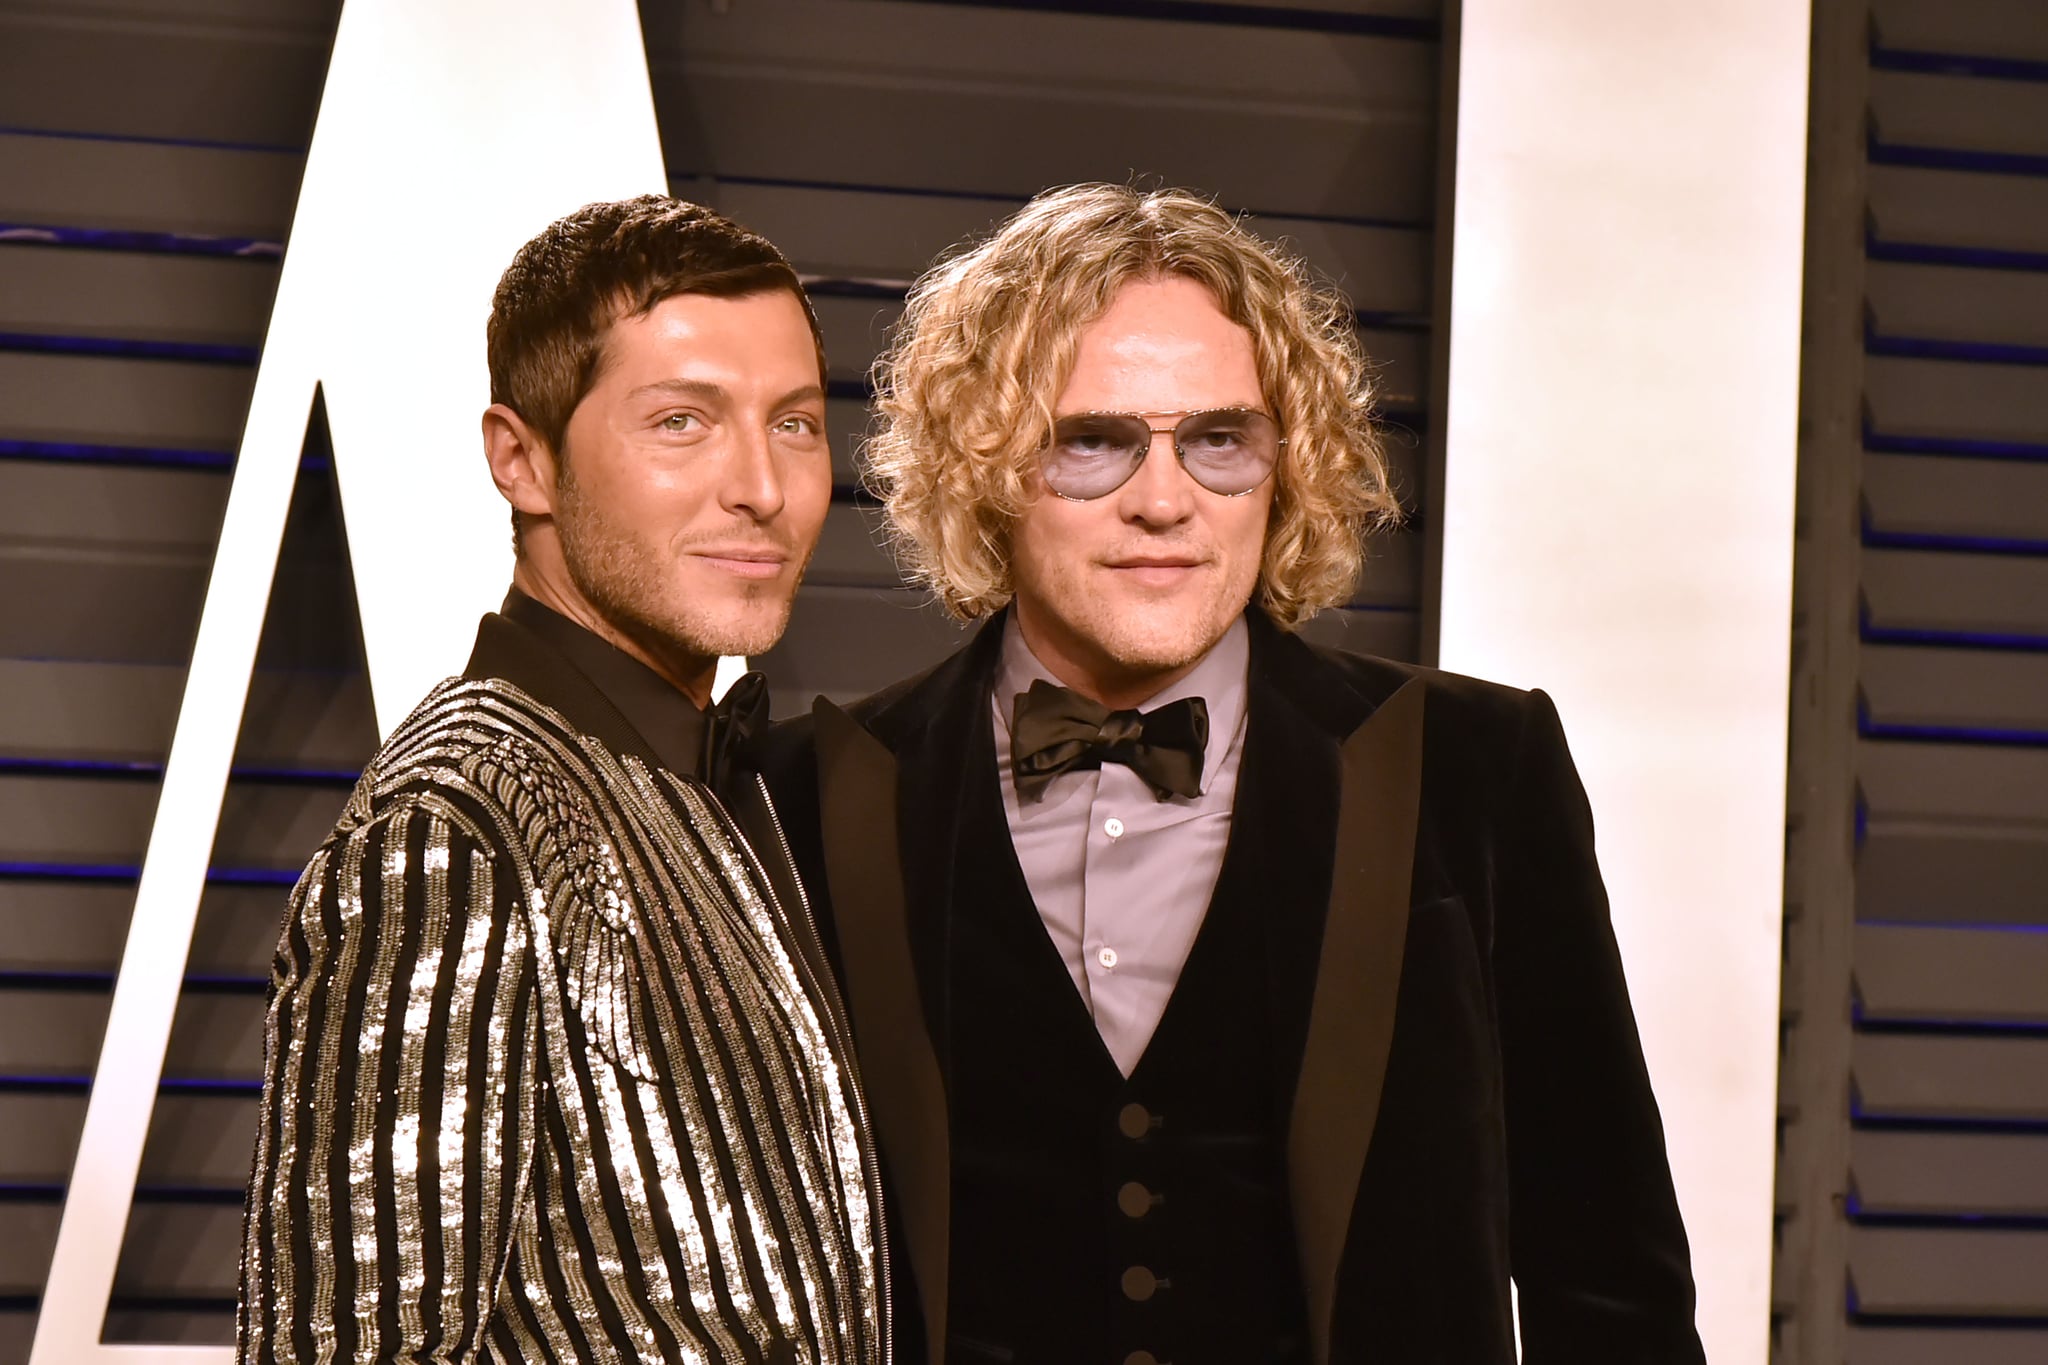 BEVERLY HILLS, CALIFORNIA - FEBRUARY 24: Peter Dundas and Evangelo Bousis attend the 2019 Vanity Fair Oscar Party at Wallis Annenberg Centre for the Performing Arts on February 24, 2019 in Beverly Hills, California. (Photo by David Crotty/Patrick McMullan via Getty Images)